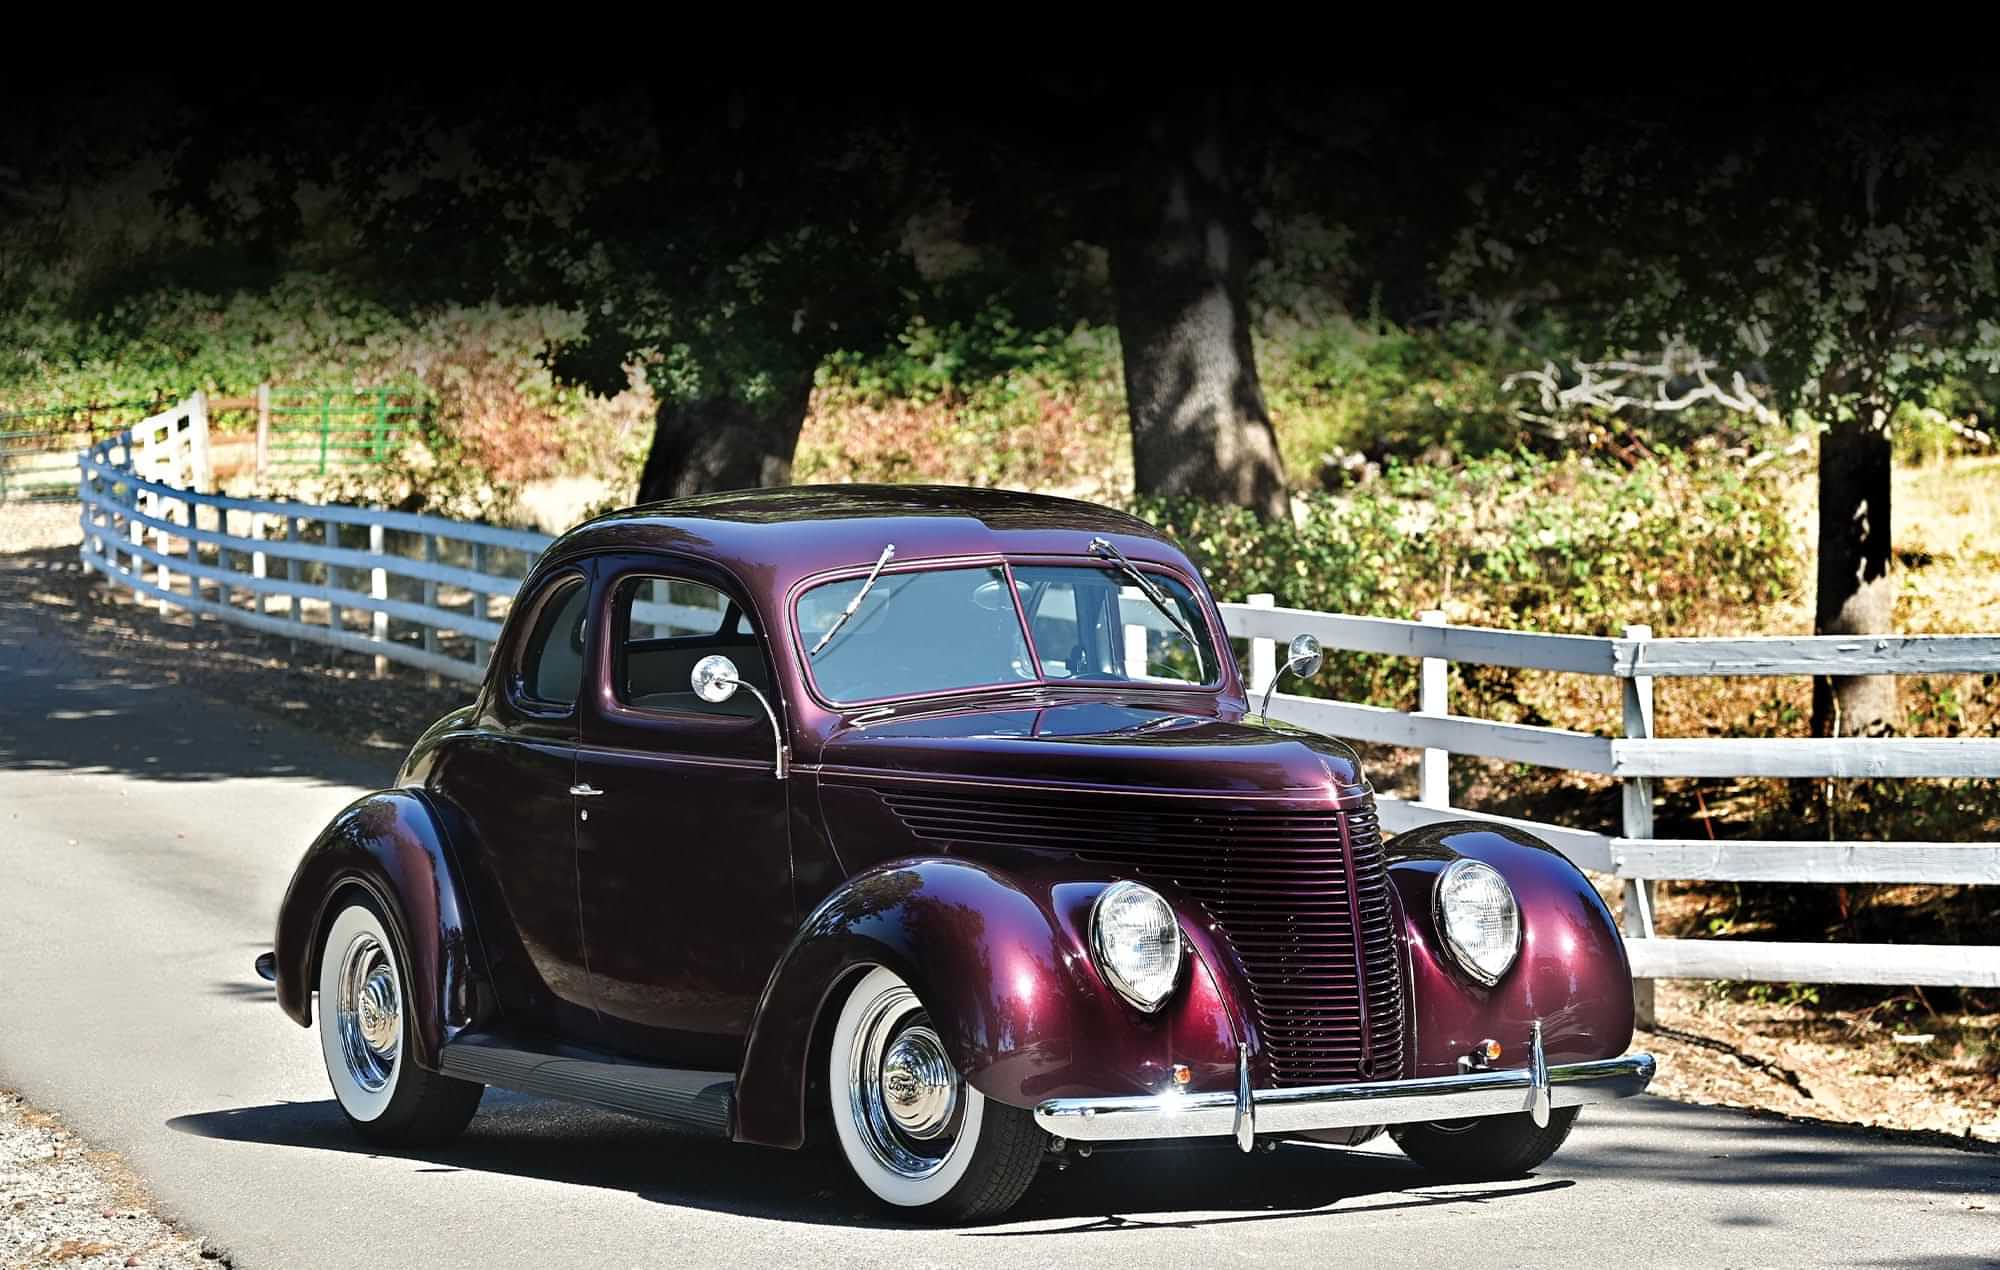 front 3/4ths view passenger side view of the deep burgundy ’38 Ford Standard Coupe parked on a narrow road beside a white picket fence and large trees